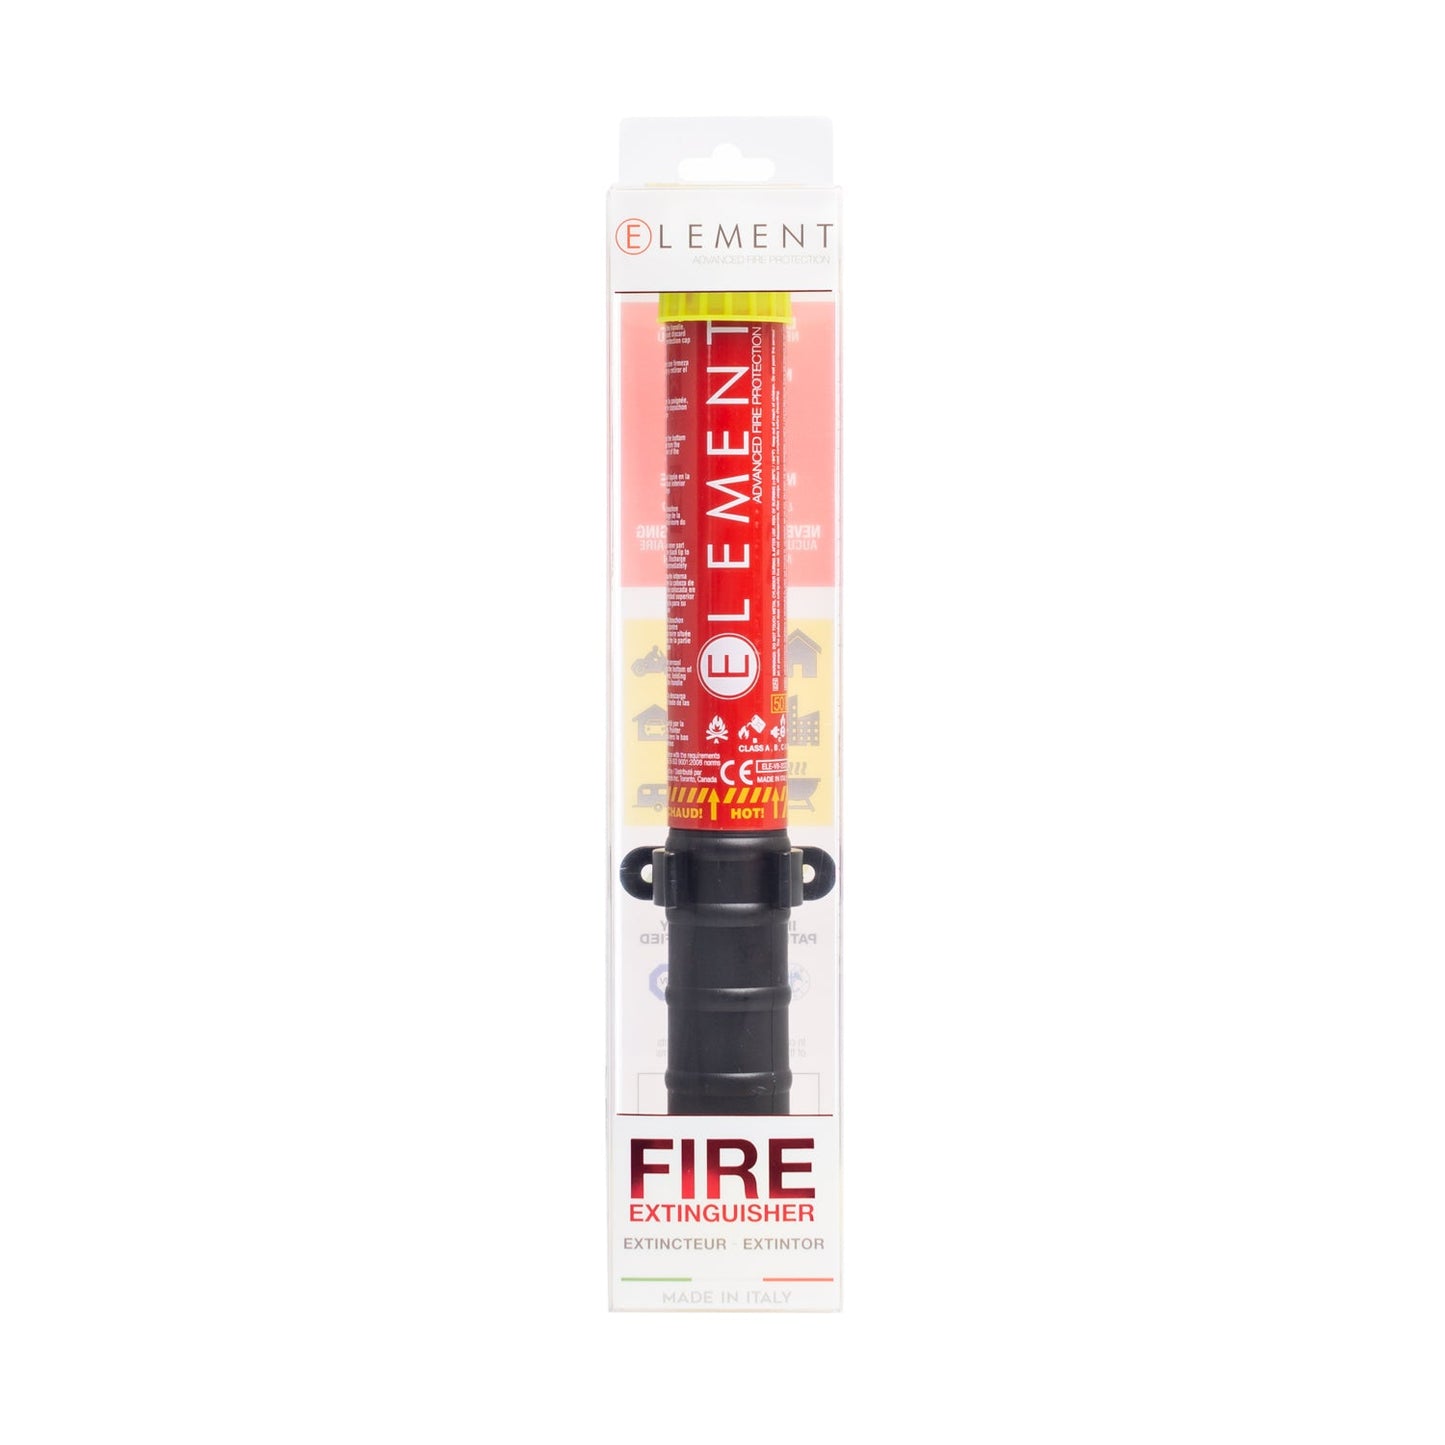 Element E50 Fire Extinguisher Product Information